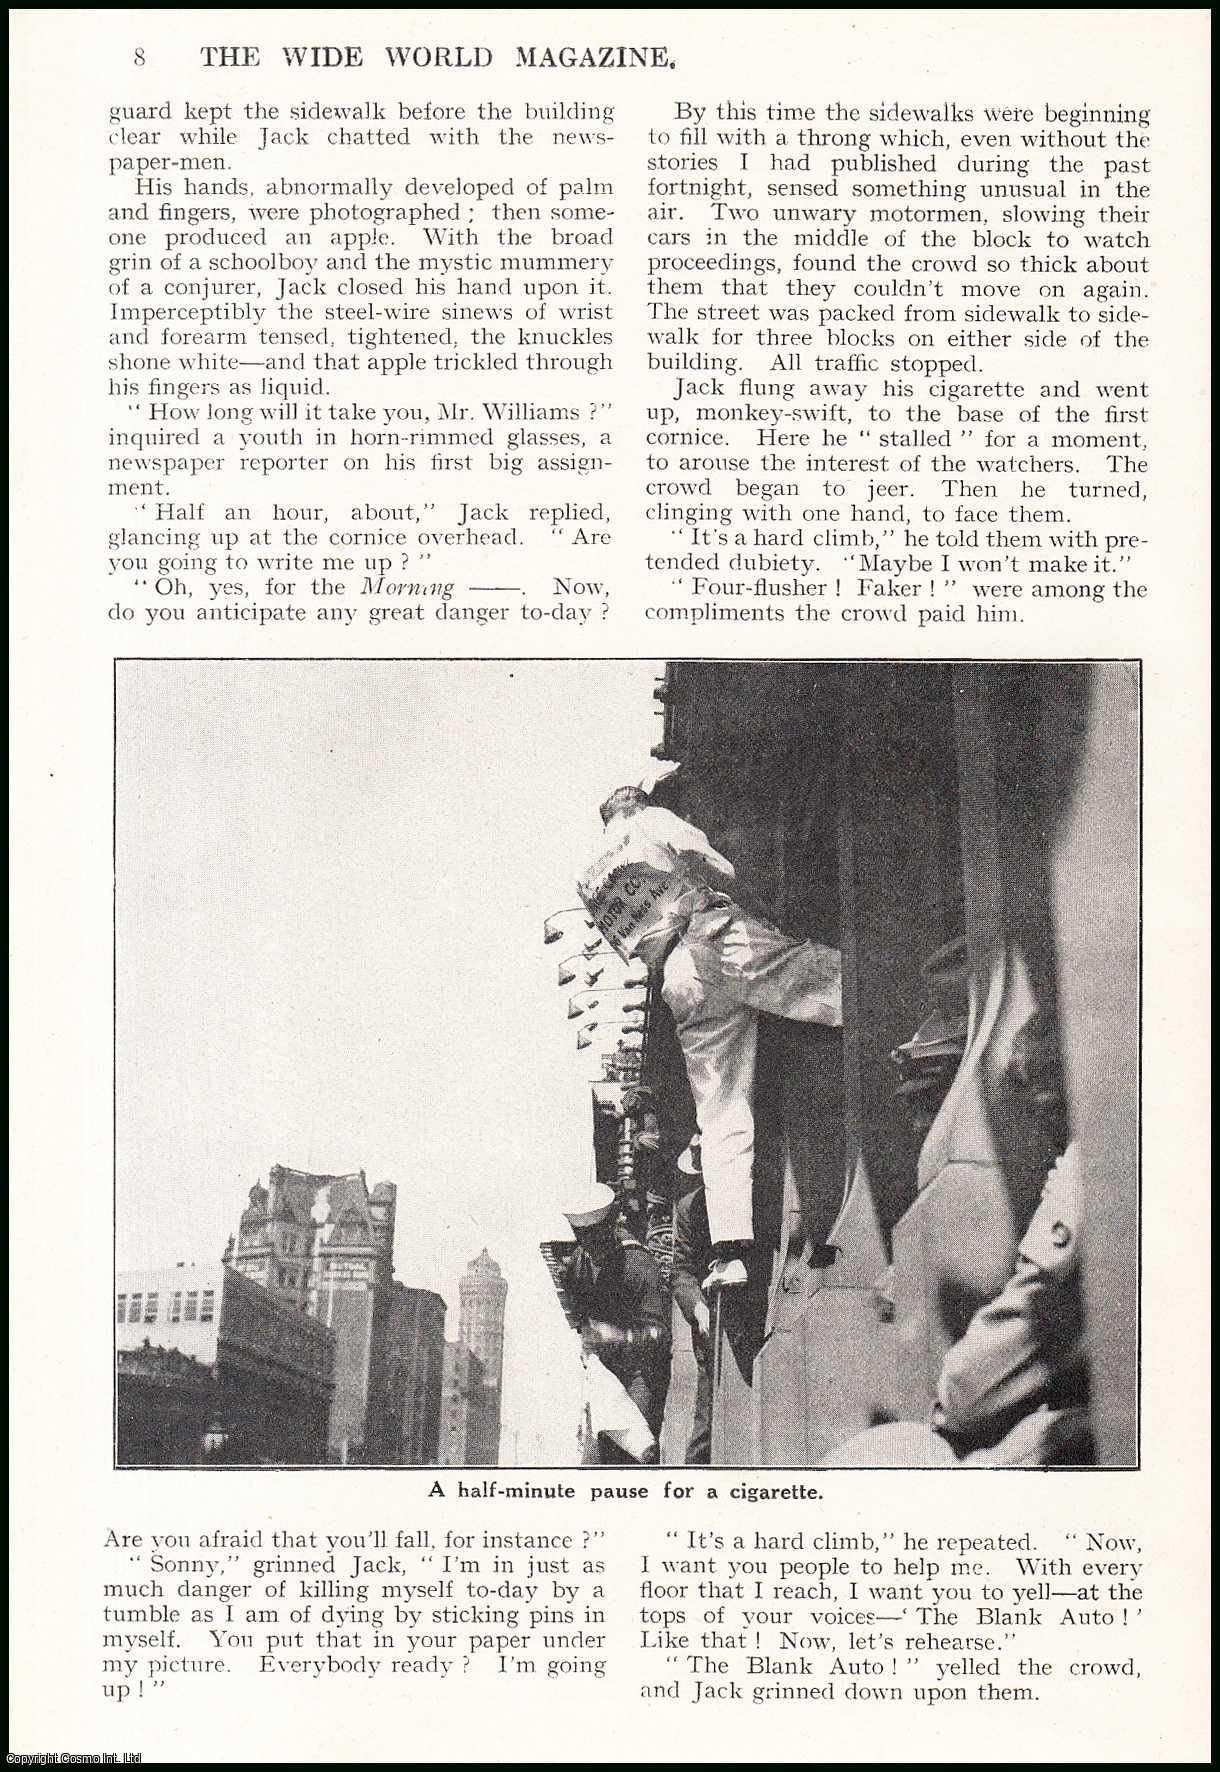 Eugene Cunningham - Jack Williams, the Human Fly : a man who has adopted a most extraordinary & perilous profession scaling lofty buildings with no other equipment than his own fingers & toes. An uncommon original article from the Wide World Magazine, 1922.